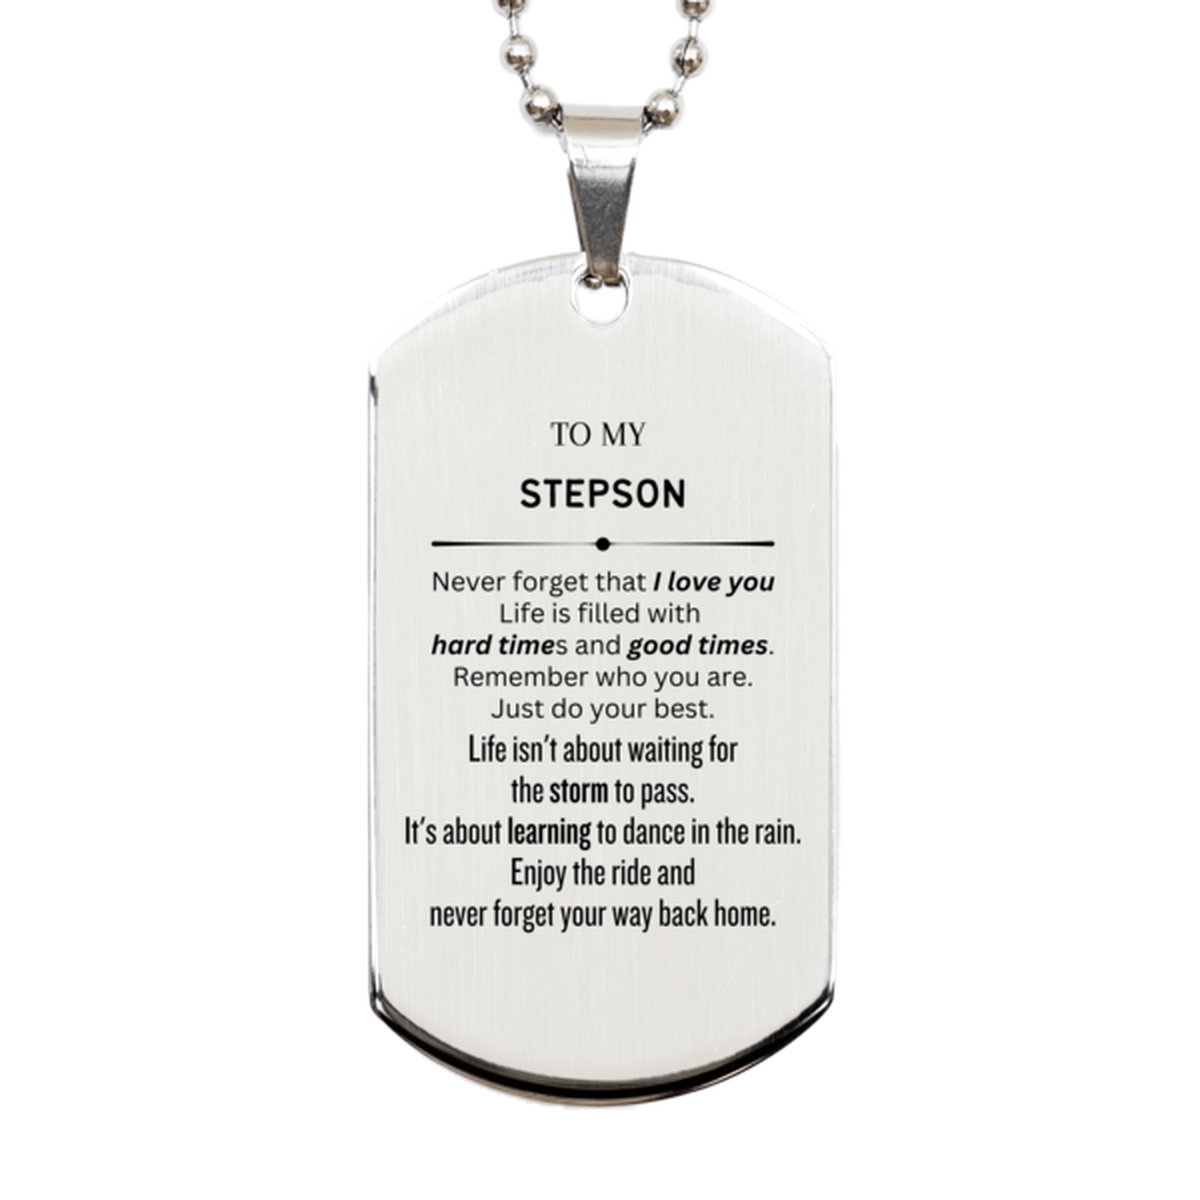 Christmas Stepson Silver Dog Tag Gifts, To My Stepson Birthday Thank You Gifts For Stepson, Graduation Unique Gifts For Stepson To My Stepson Never forget that I love you life is filled with hard times and good times. Remember who you are. Just do your be